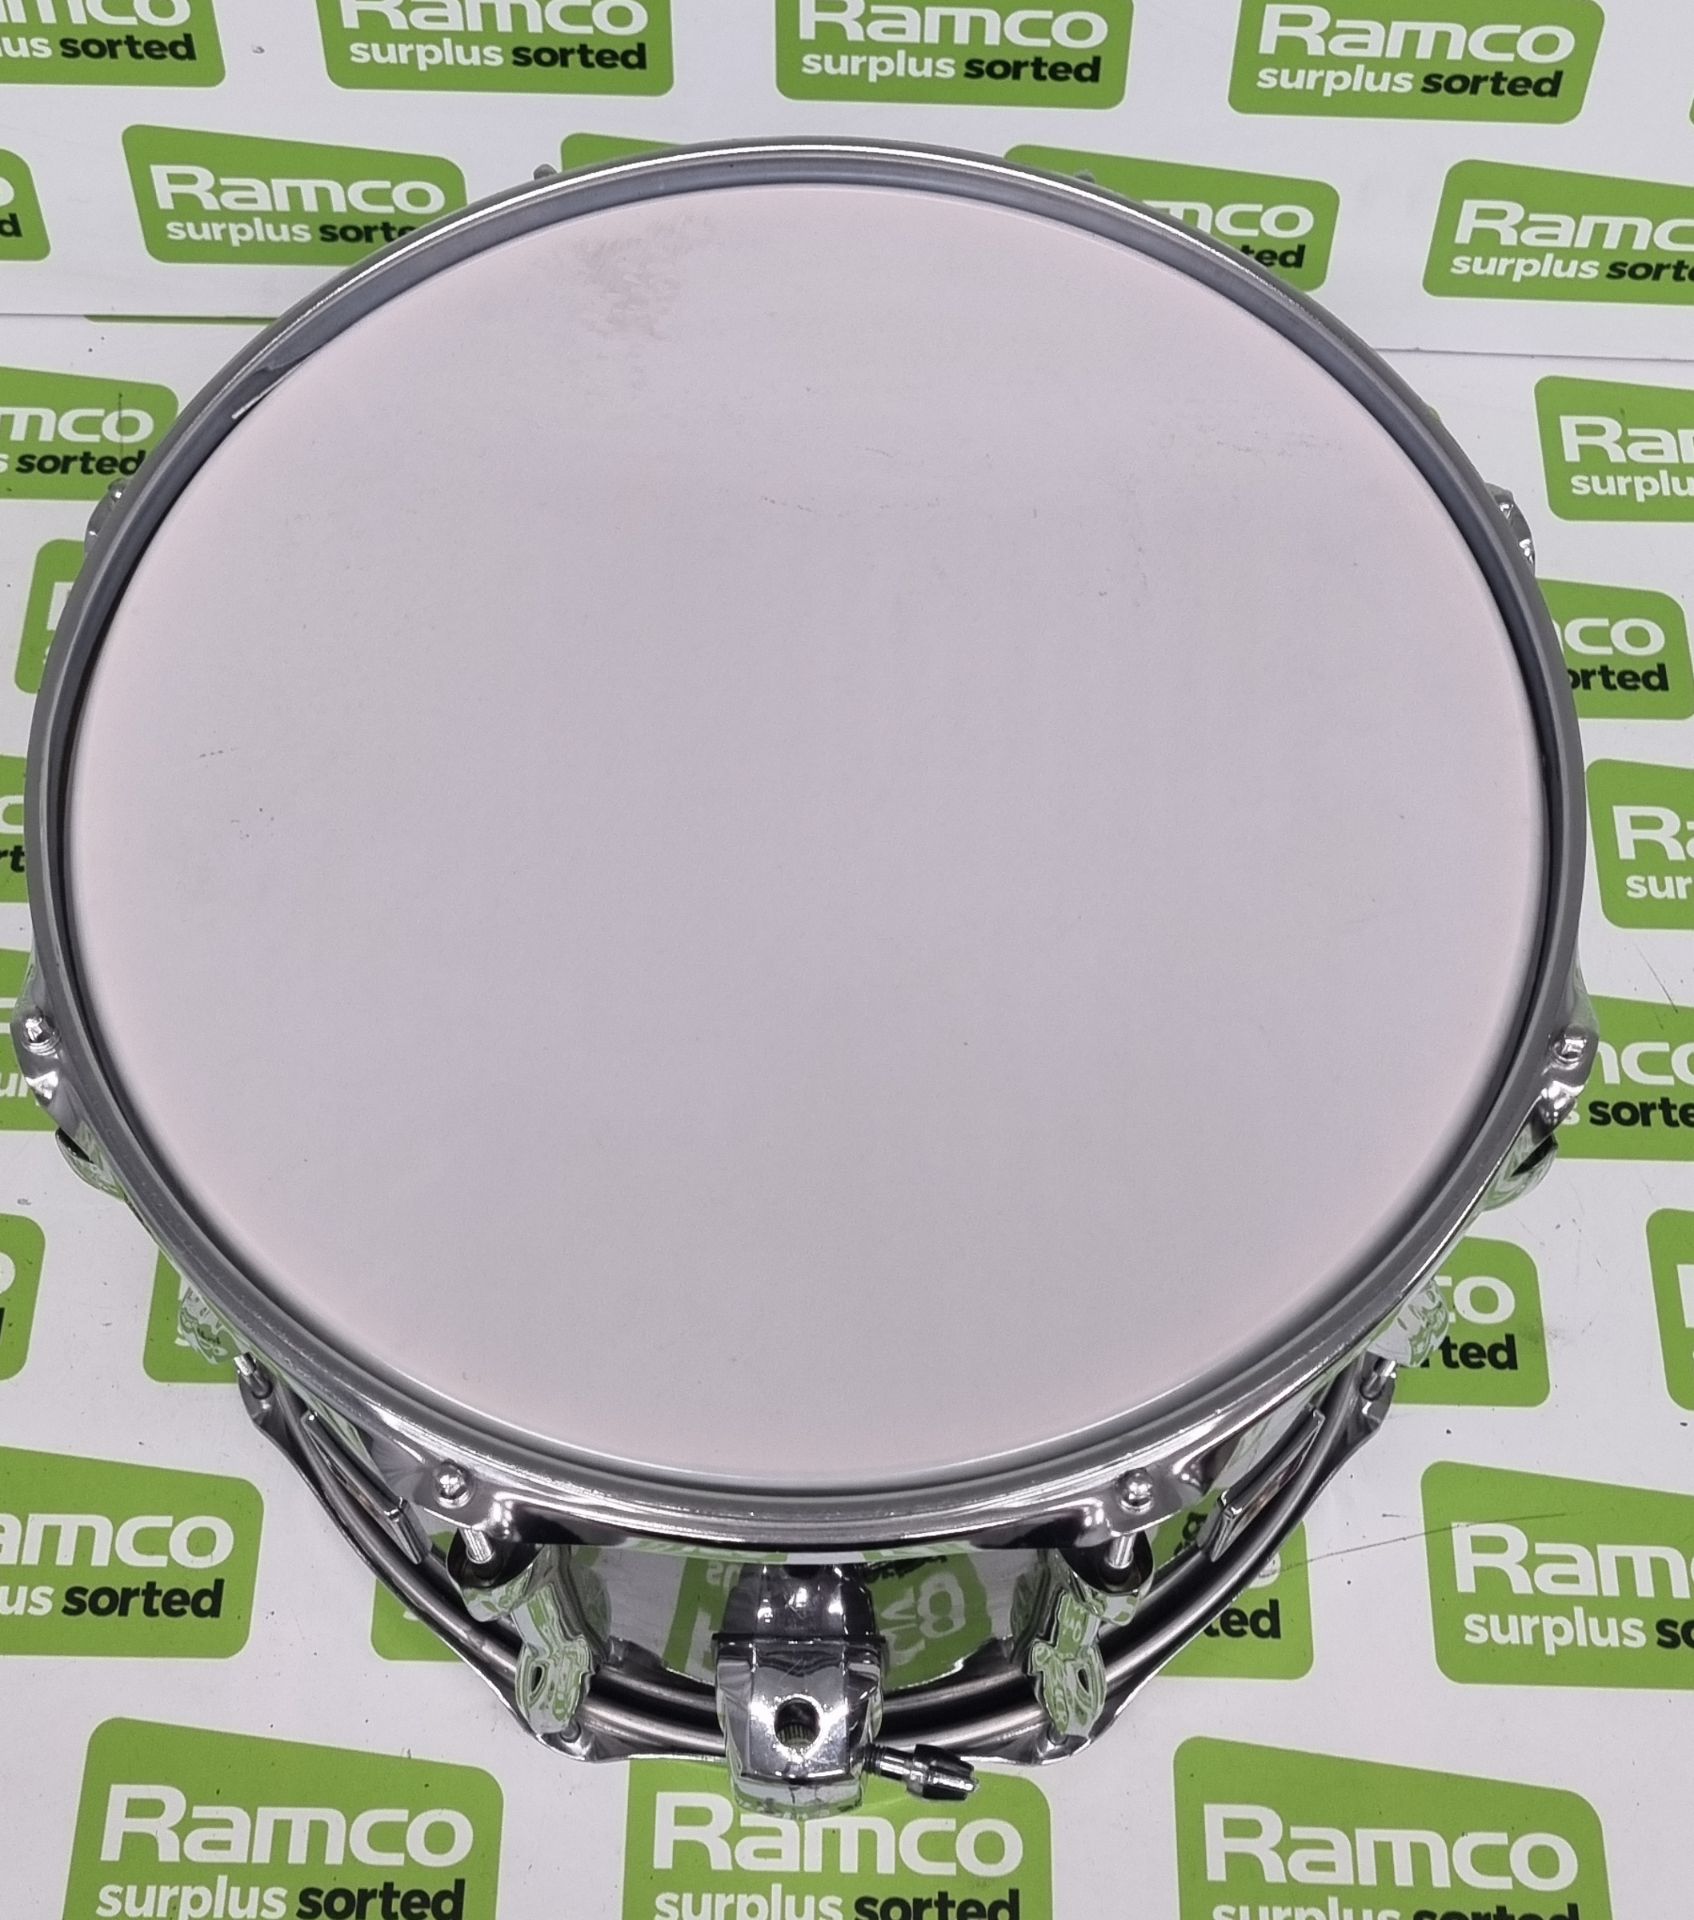 Premier 14 inch tom drum with Procase - Image 9 of 9